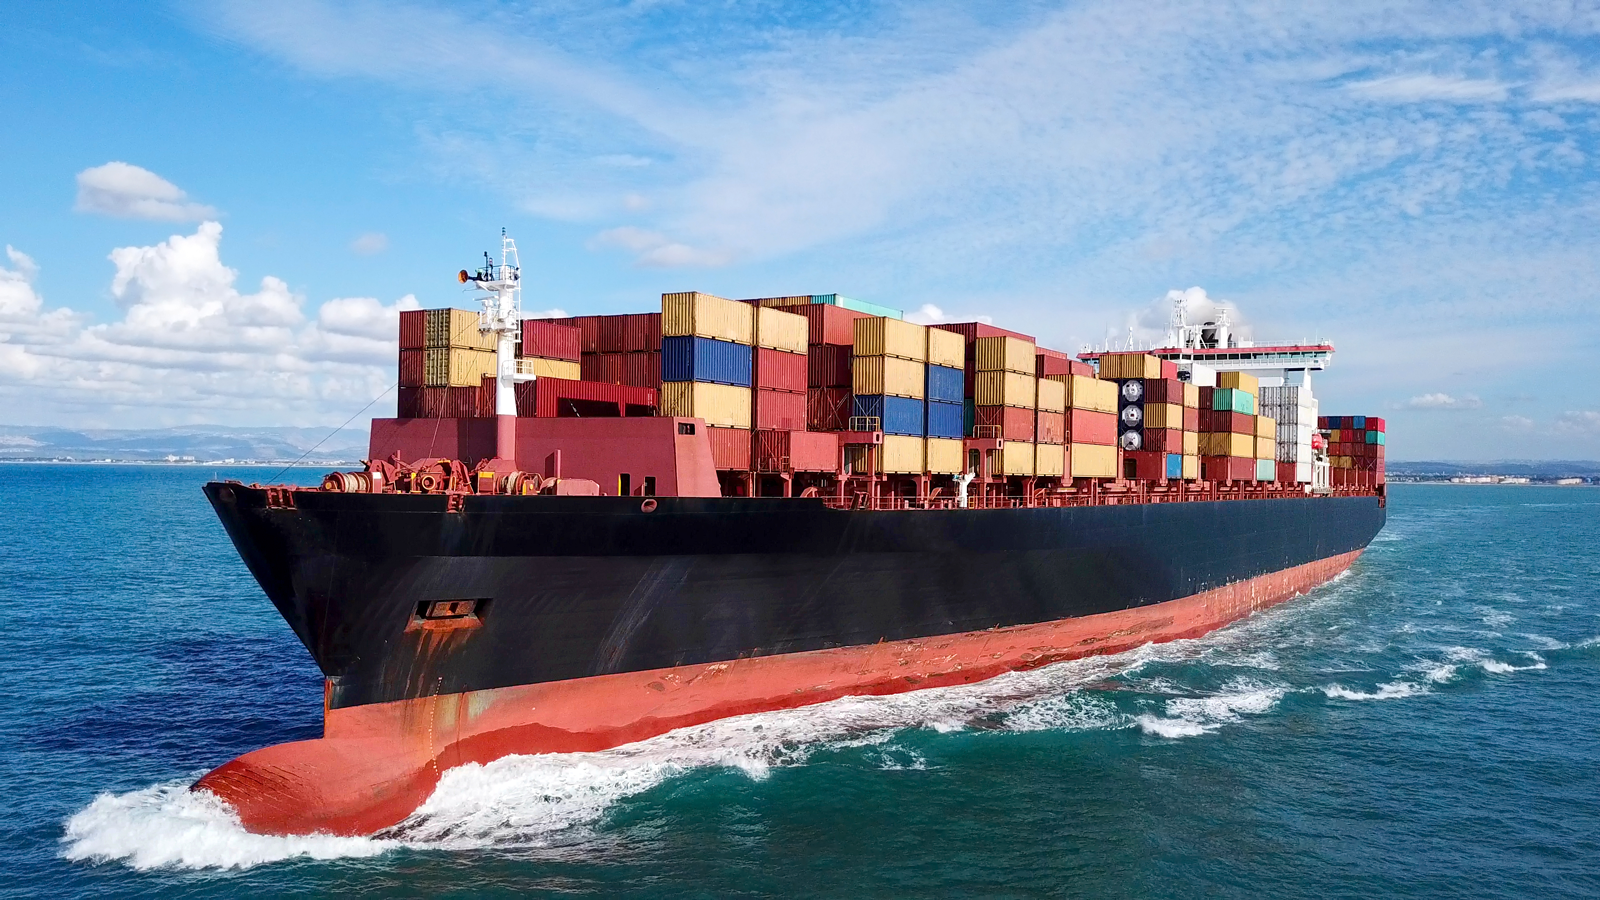 New report calls for urgent action as shipping industry falls behind climate goals by 17%